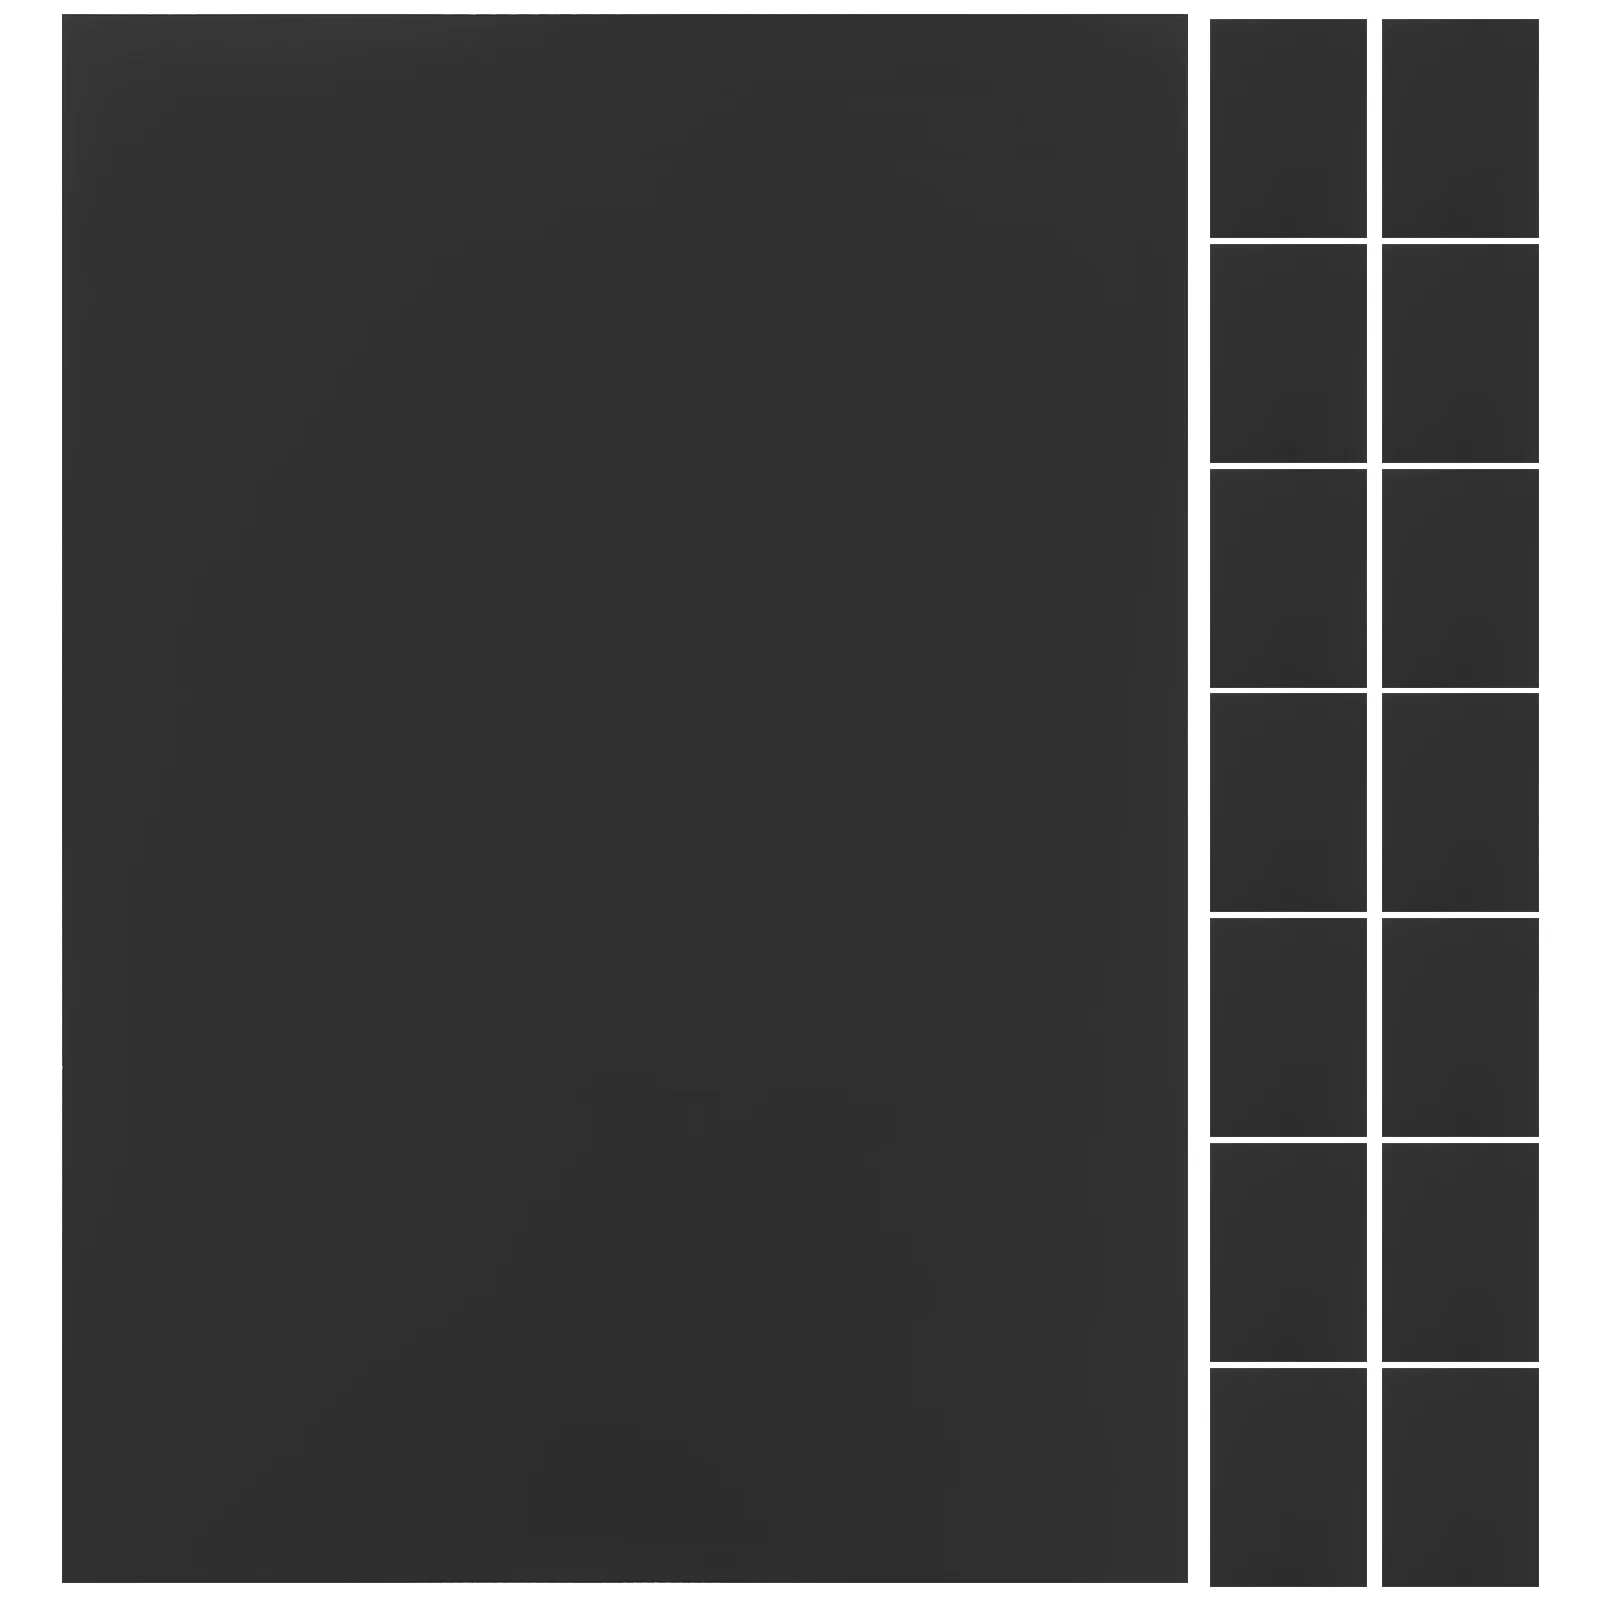 

20 Sheets Black Cardboard Stock Paper DIY Papers Blank for Print Origami Material Crafts Making Painting Tools